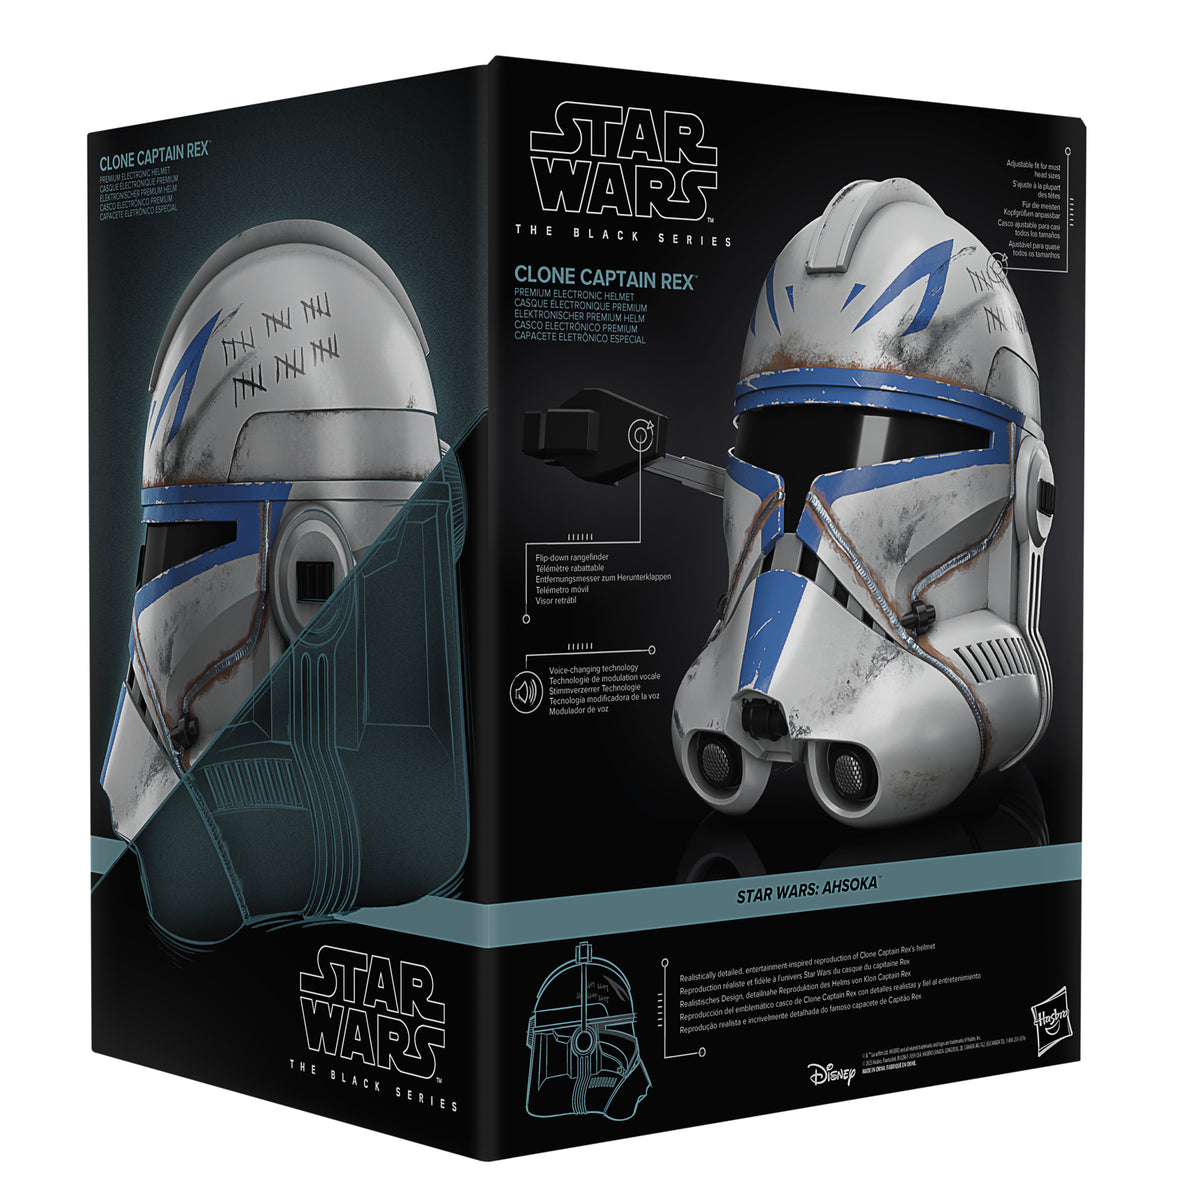 Save on Hasbro Black Series Star Wars collectibles: Lightsabers, helmets,  more from $81